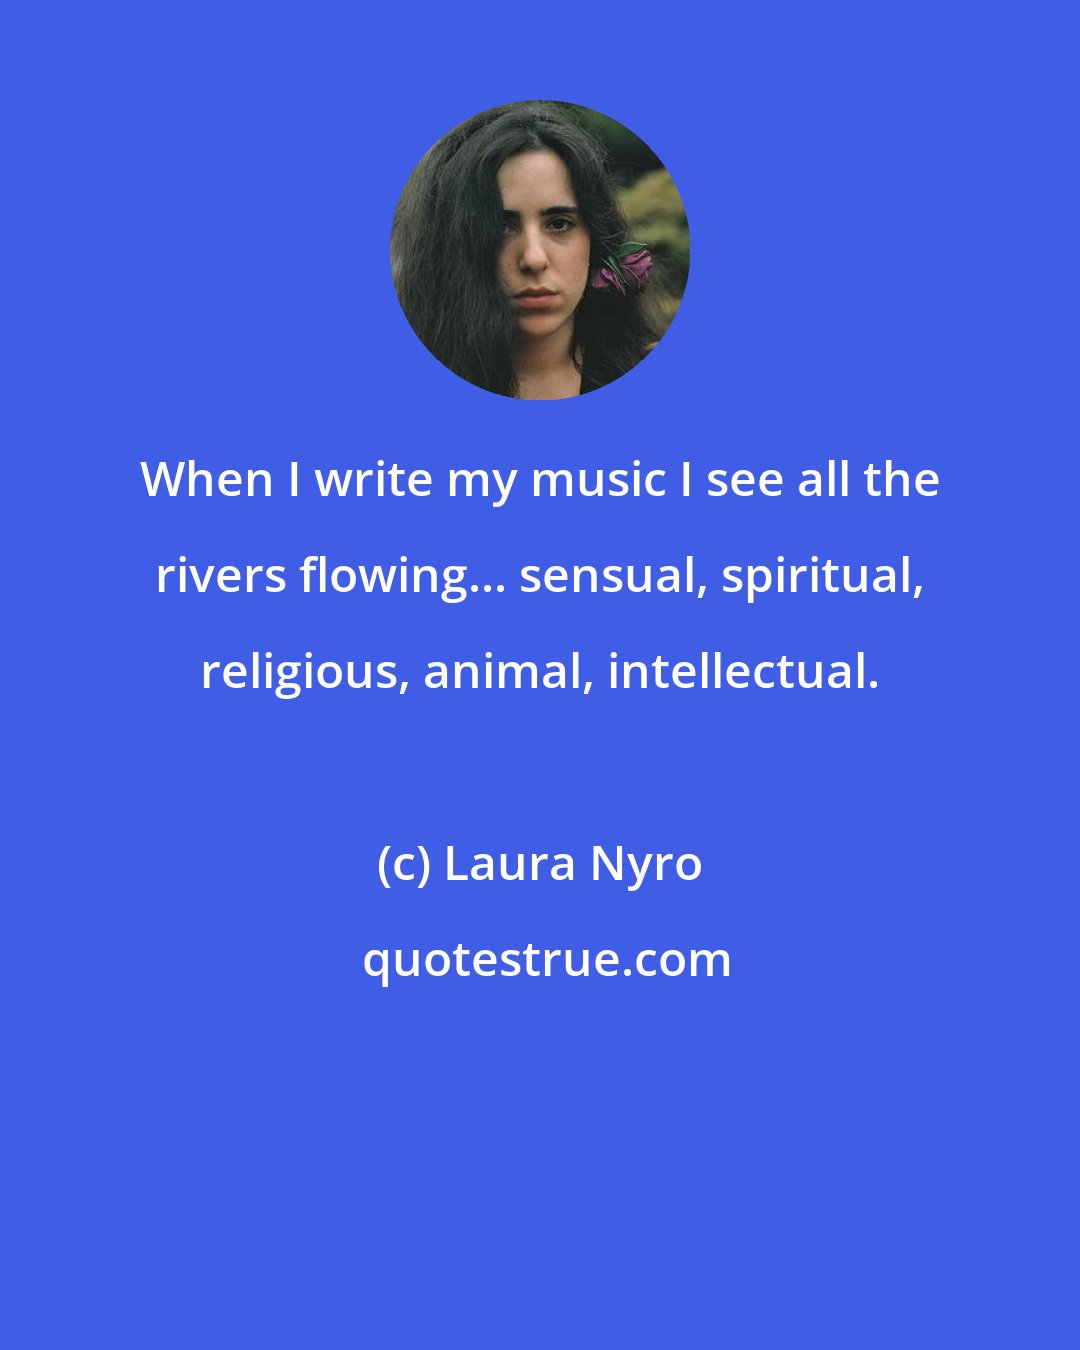 Laura Nyro: When I write my music I see all the rivers flowing... sensual, spiritual, religious, animal, intellectual.